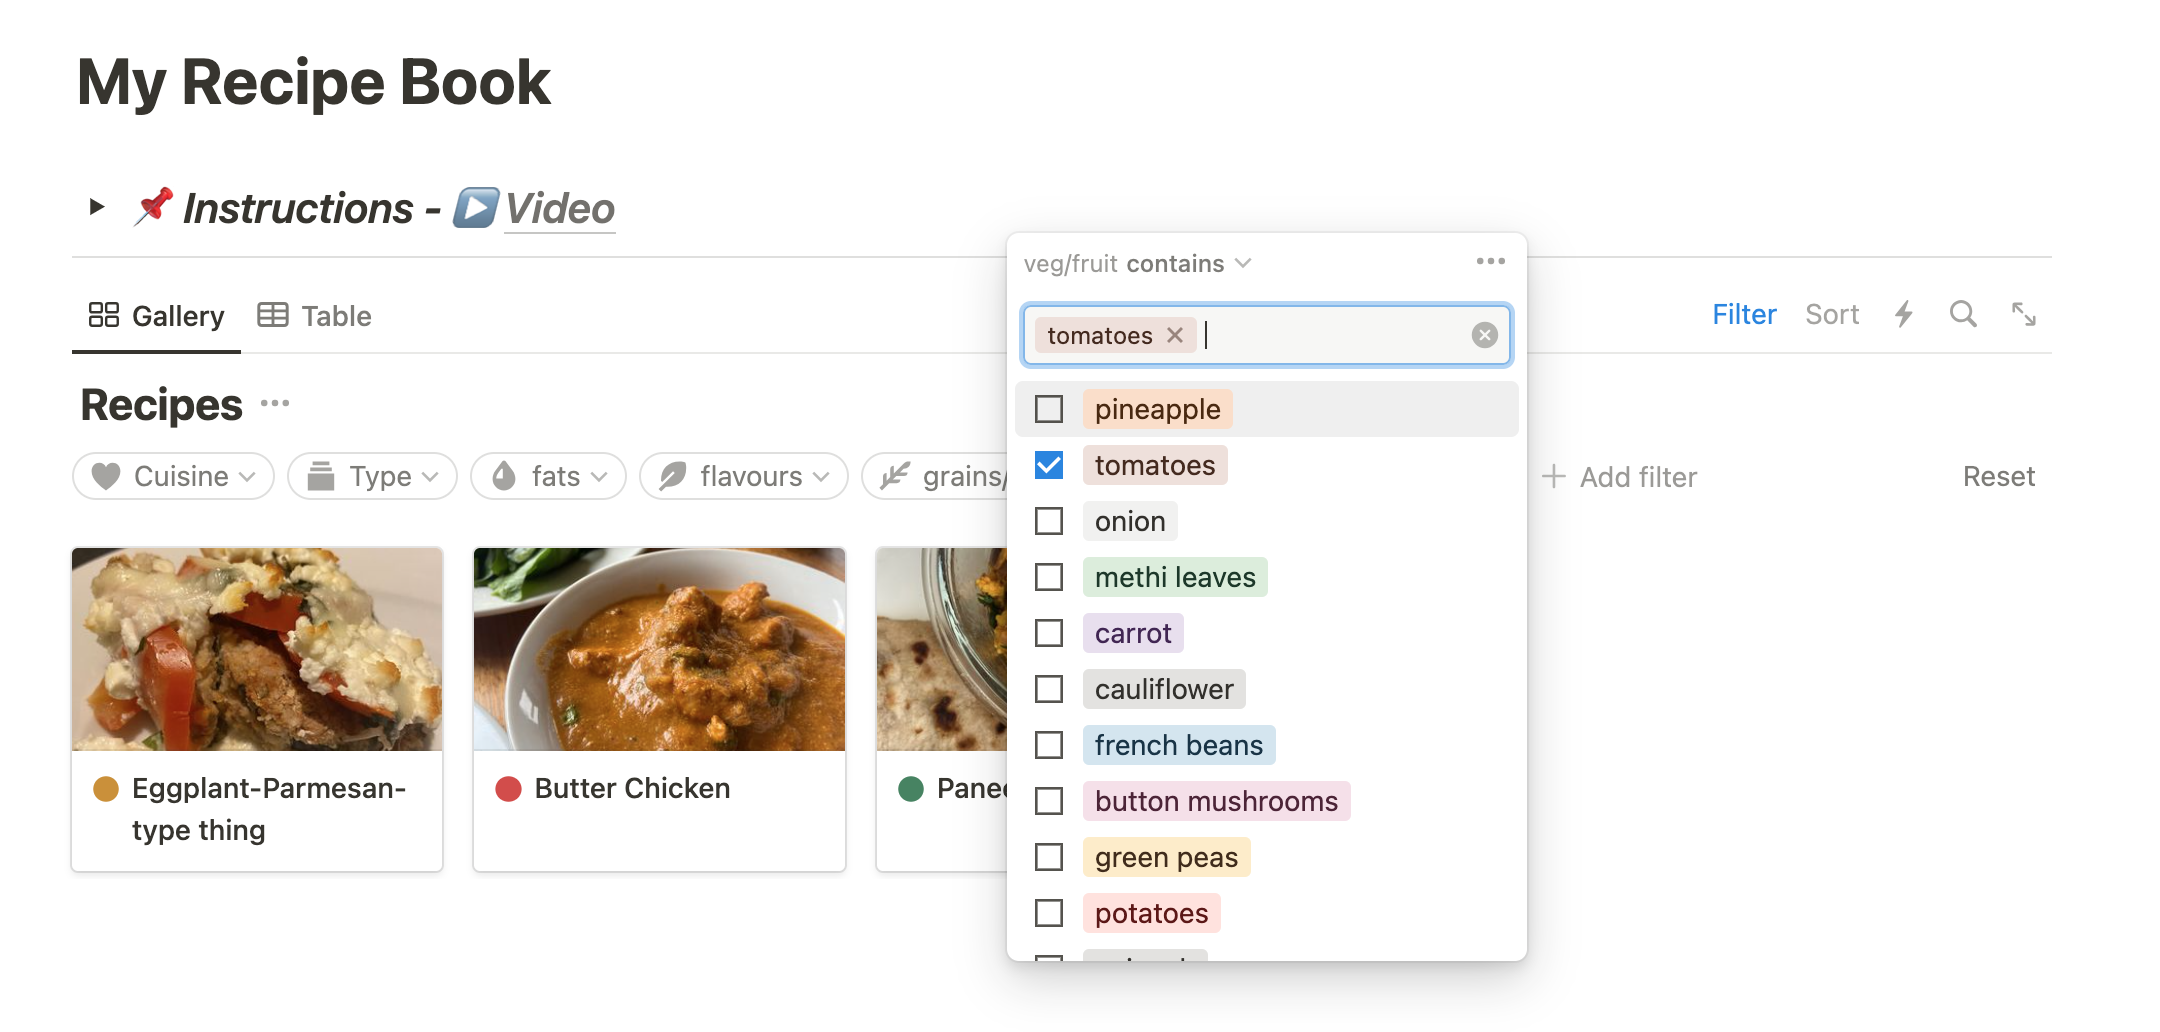 Organise and find your recipe cards through filters to help you decide what to cook!